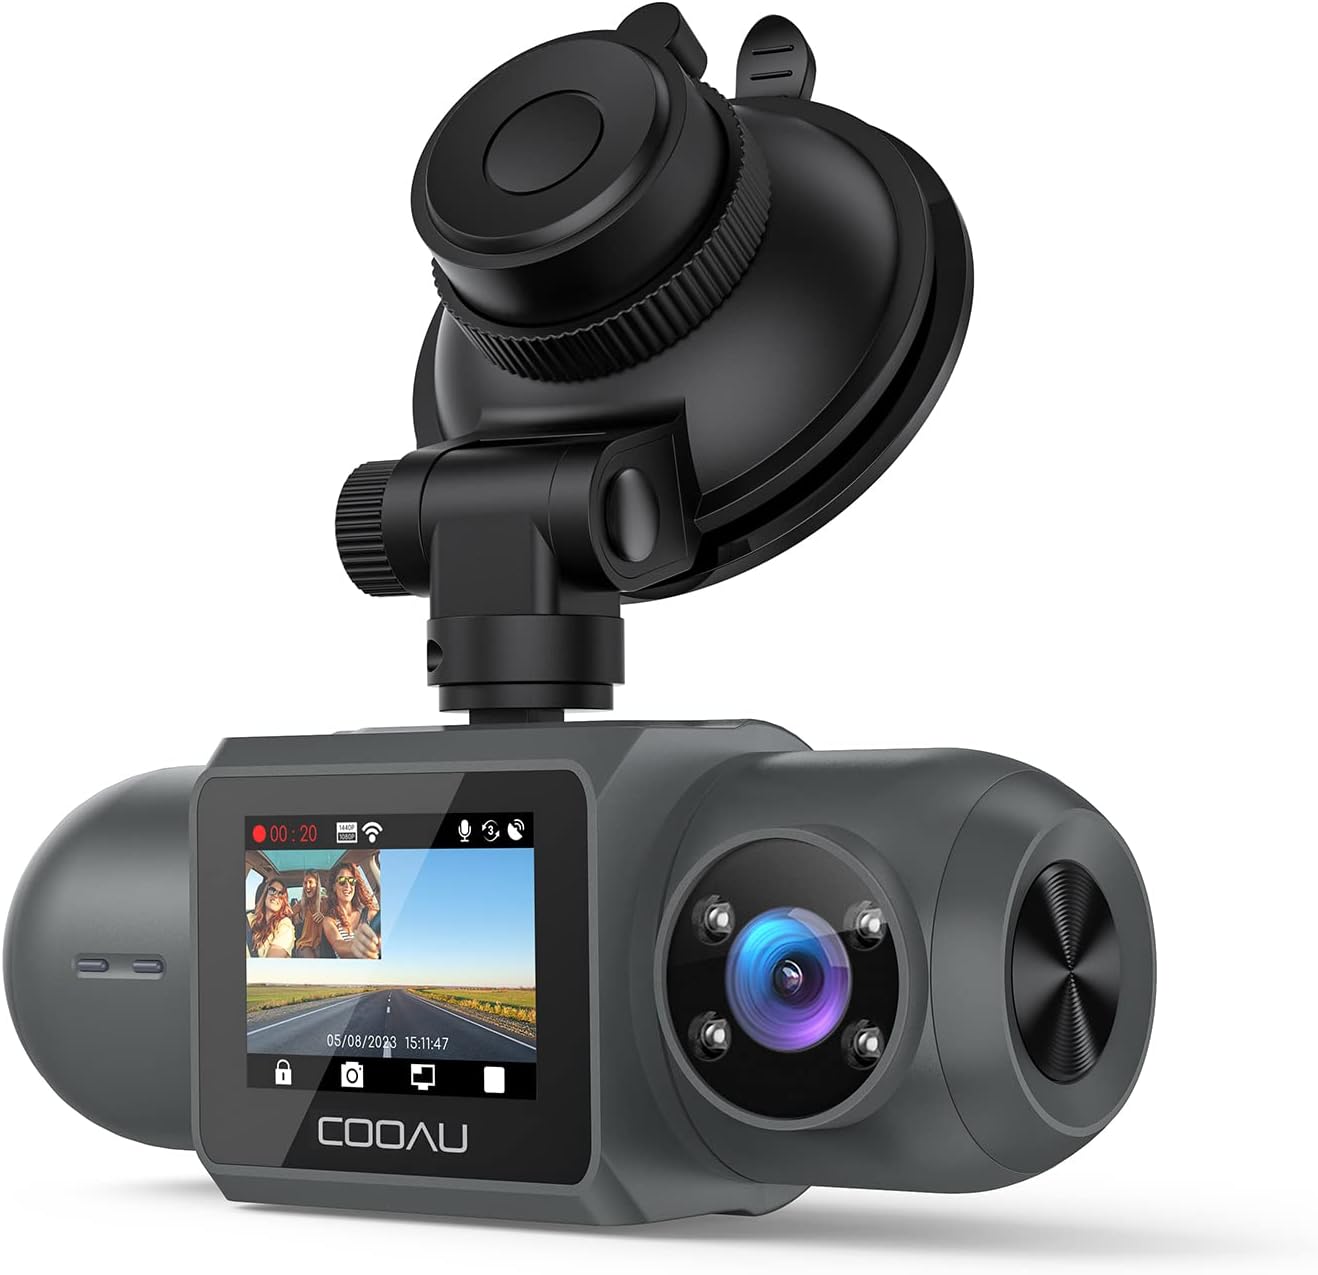 1440P QHD Built-in GPS Wi-Fi Dash Cam, Front and [...]